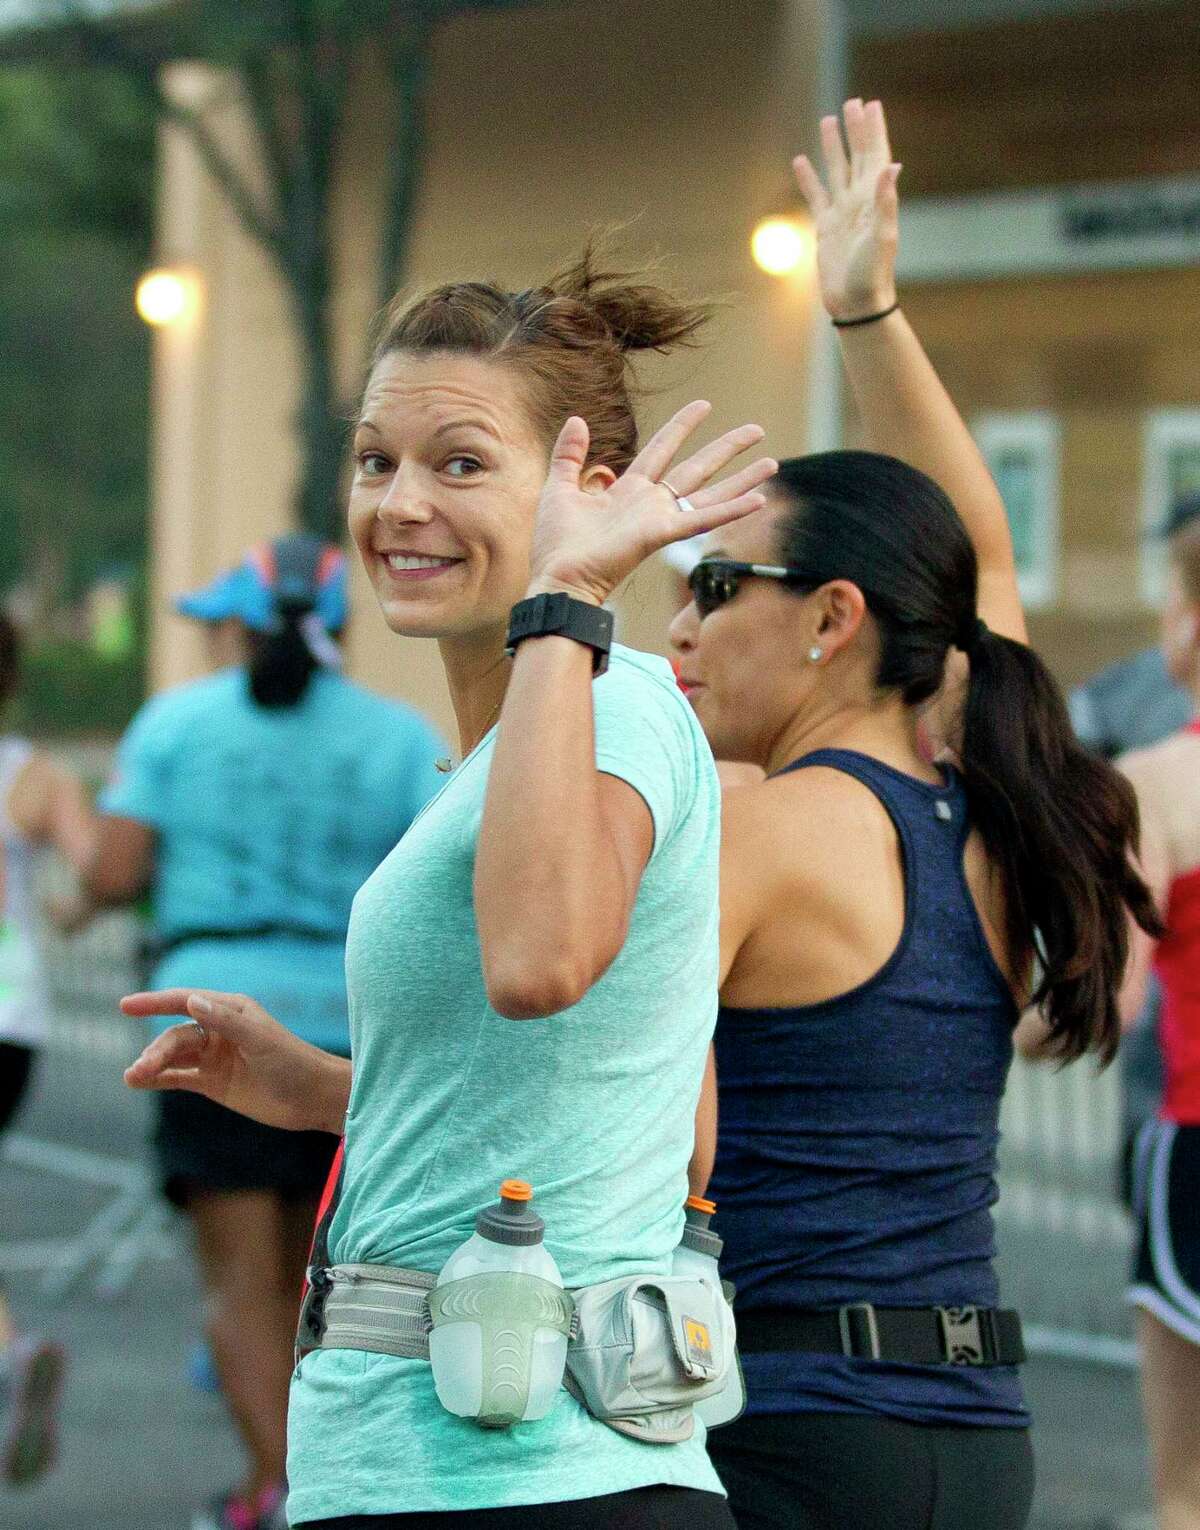 A woman waves as she takes part in the annual 10 for Texas race at Market Street, Saturday, Oct. 14, 2017, in The Woodlands.